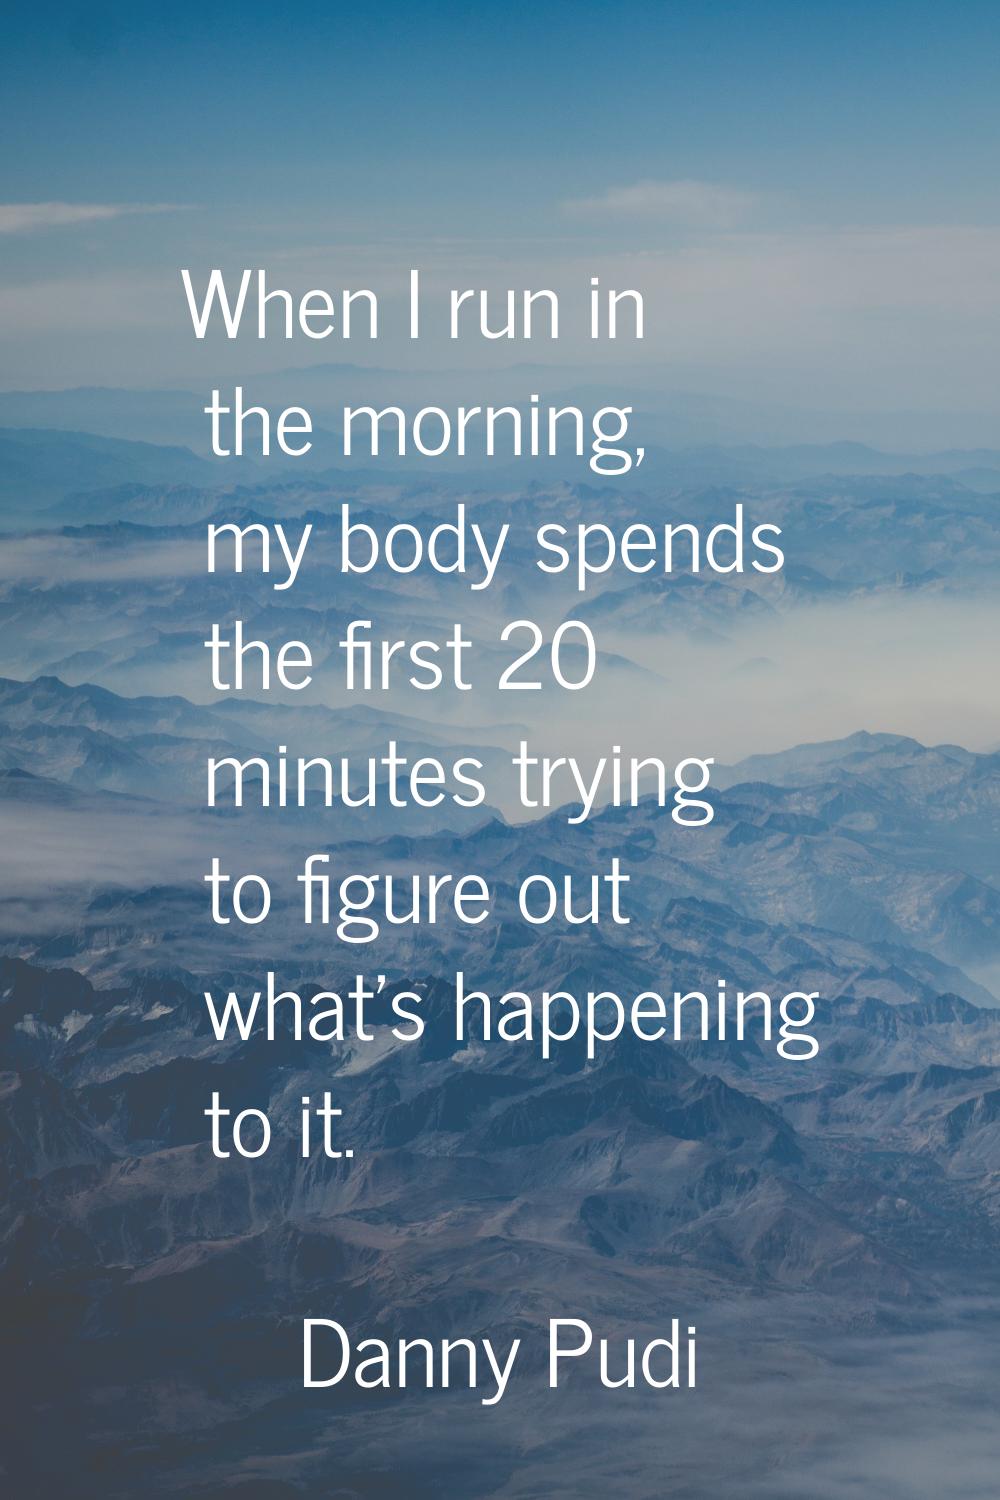 When I run in the morning, my body spends the first 20 minutes trying to figure out what's happenin